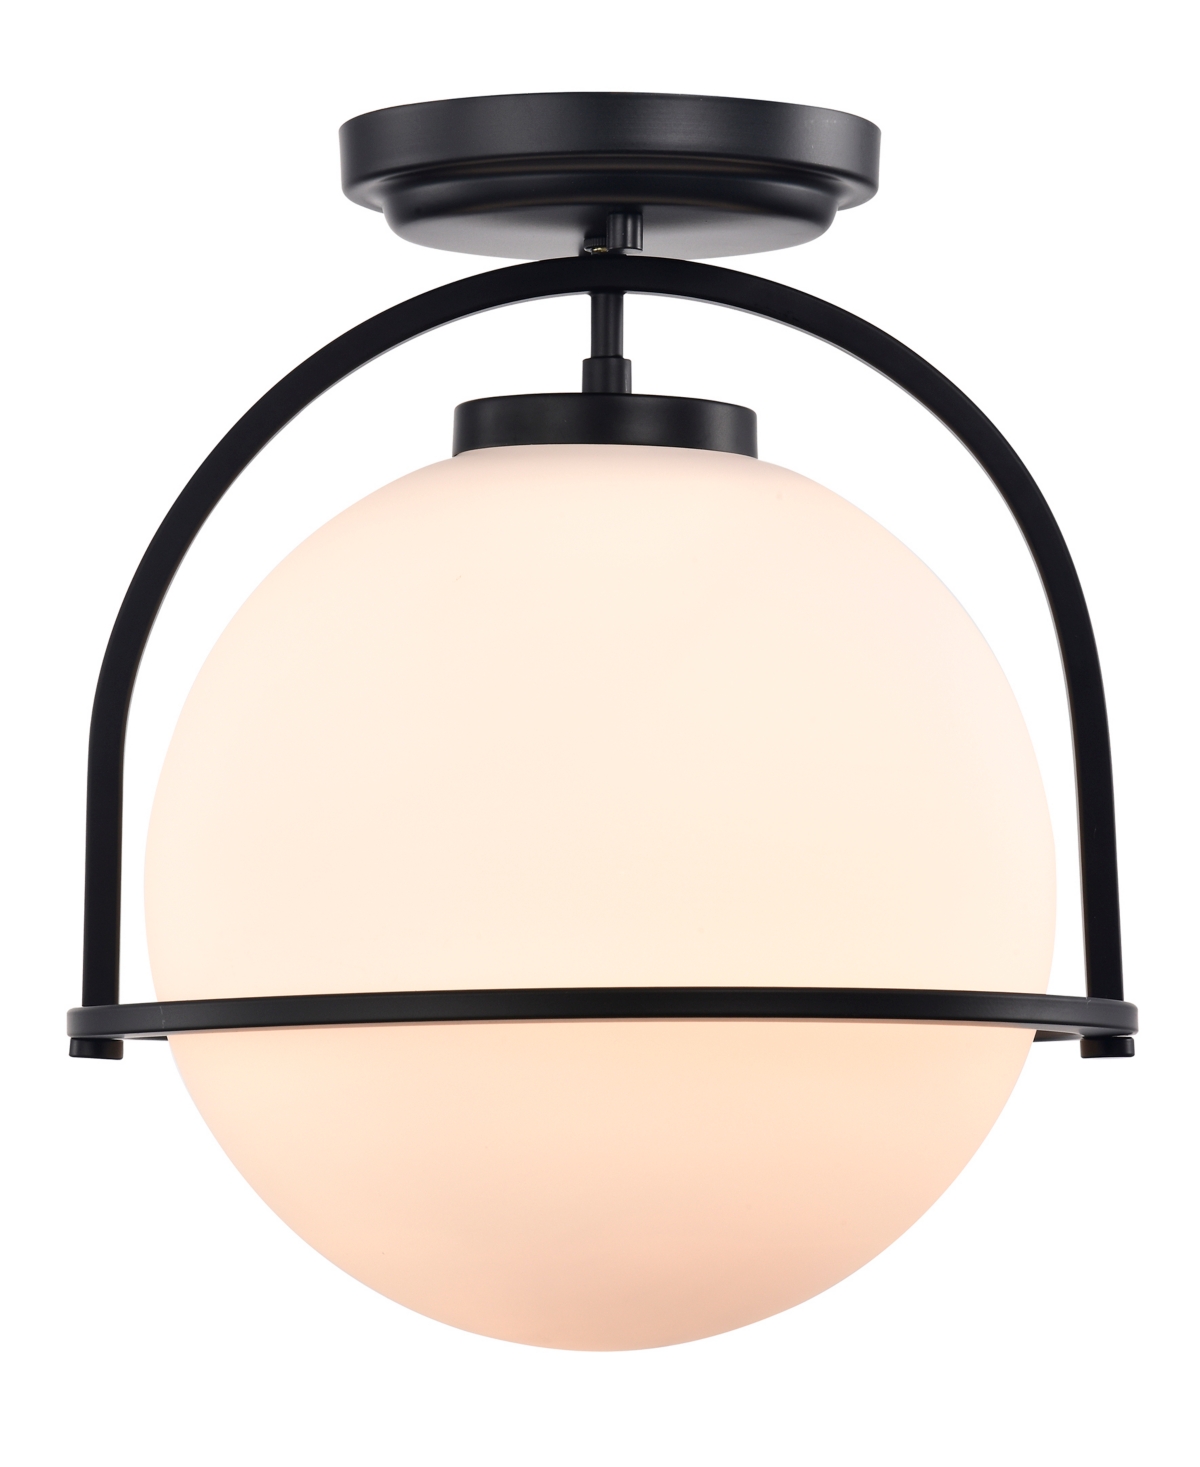 Home Accessories Nuka 12" 1-light Indoor Flush Mount With Light Kit In Matte Black